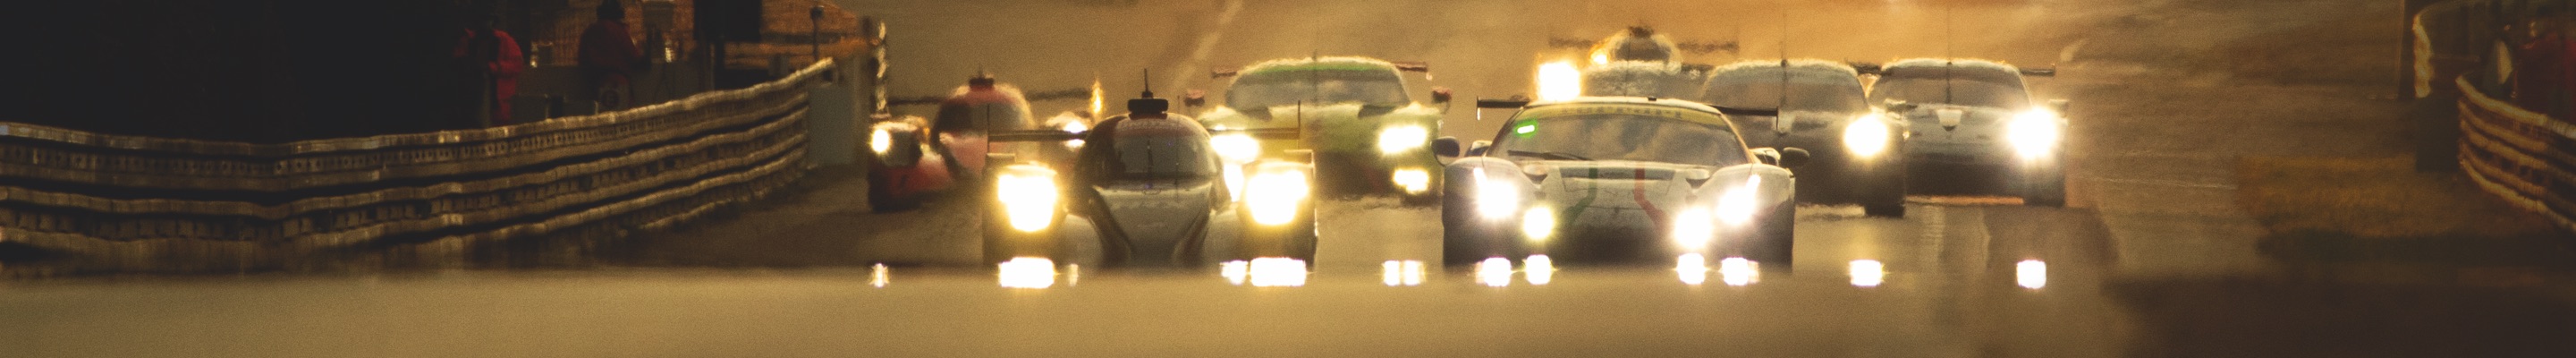 Le-Mans motorsports cars with headlights on, driving on race track